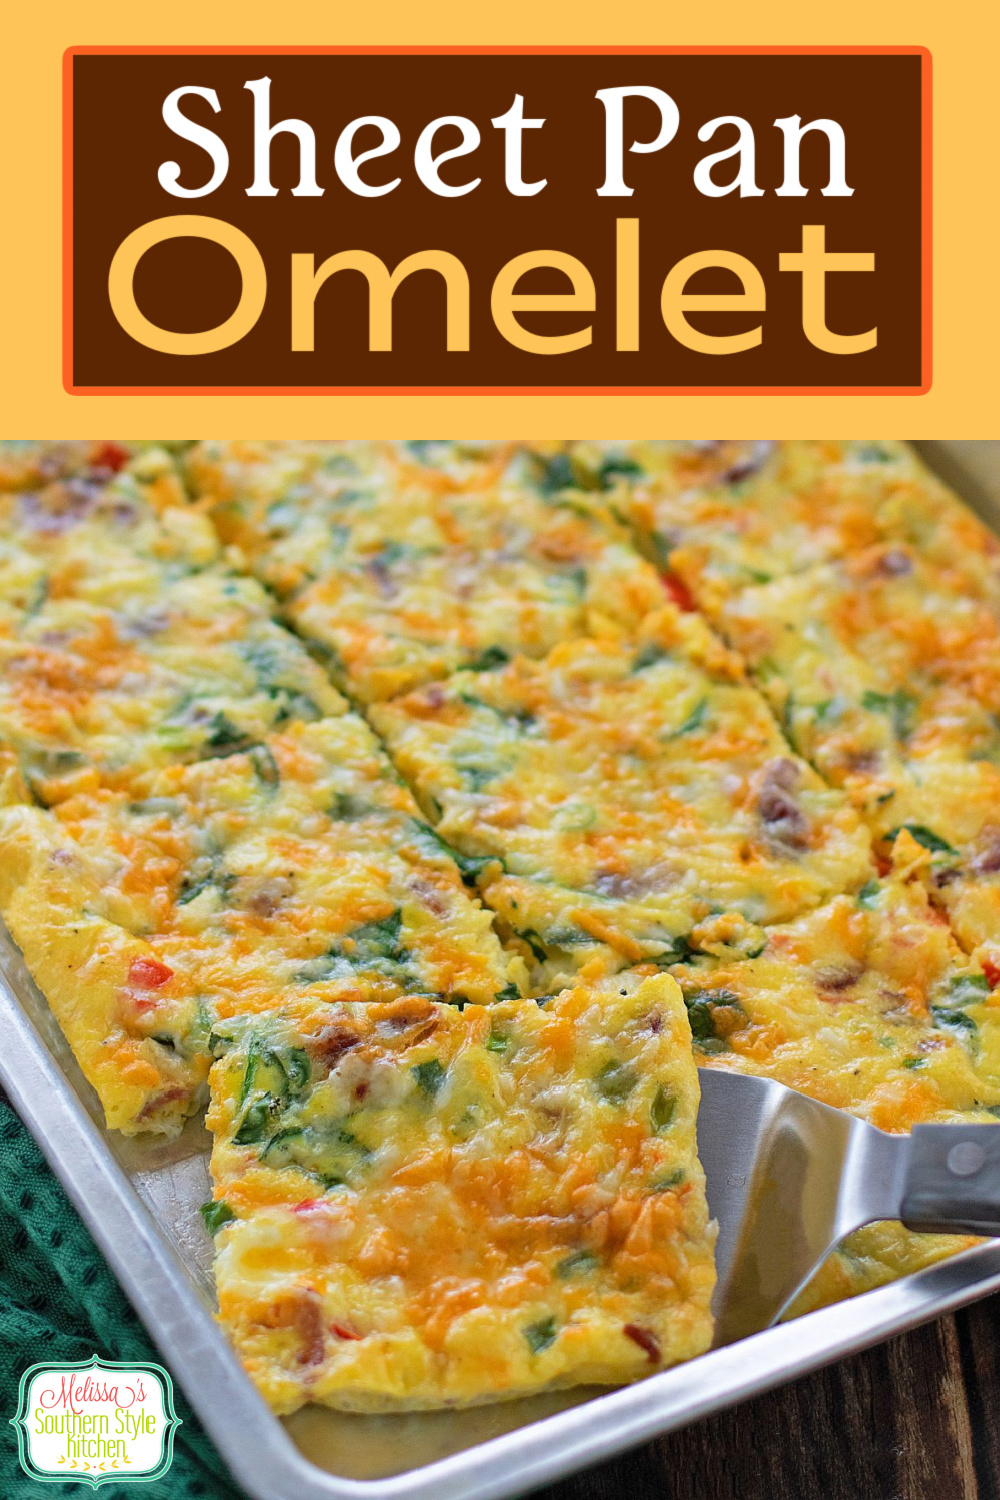 This Sheet Pan Omelet is an efficient way to meal prep breakfast for the week or cook omelets for a crowd in one fell swoop #sheetpanomelet #bakedomelet #omeletrecipes #breakfast #brunch #mealpreprecipes #ovenomelet #omeletrecipes